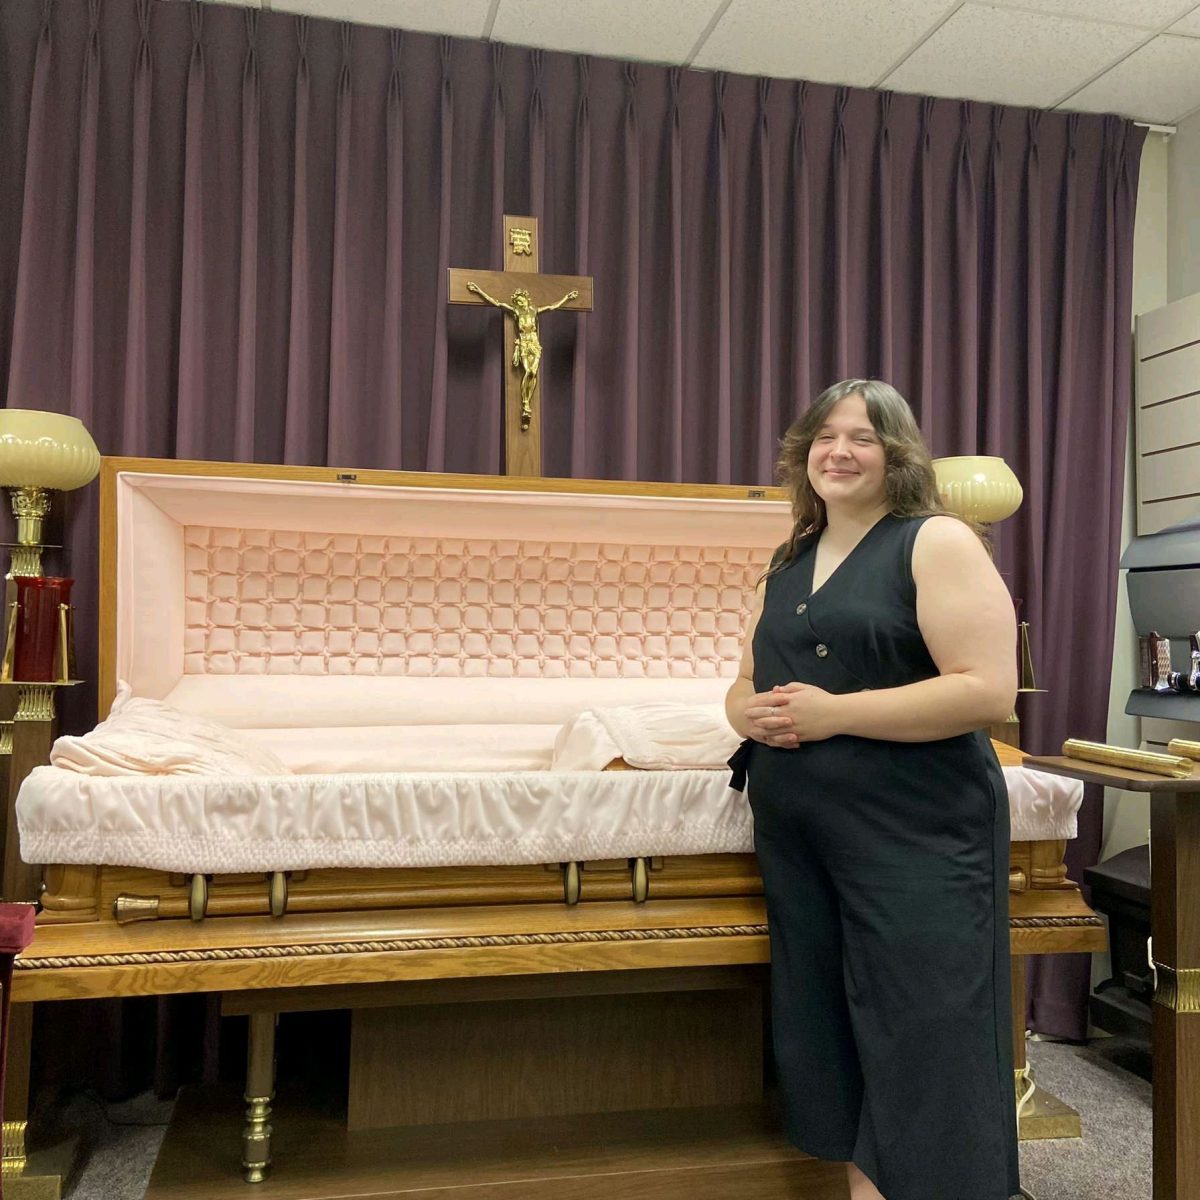 Dealing with the dead: A day in the life of a mortuary science student